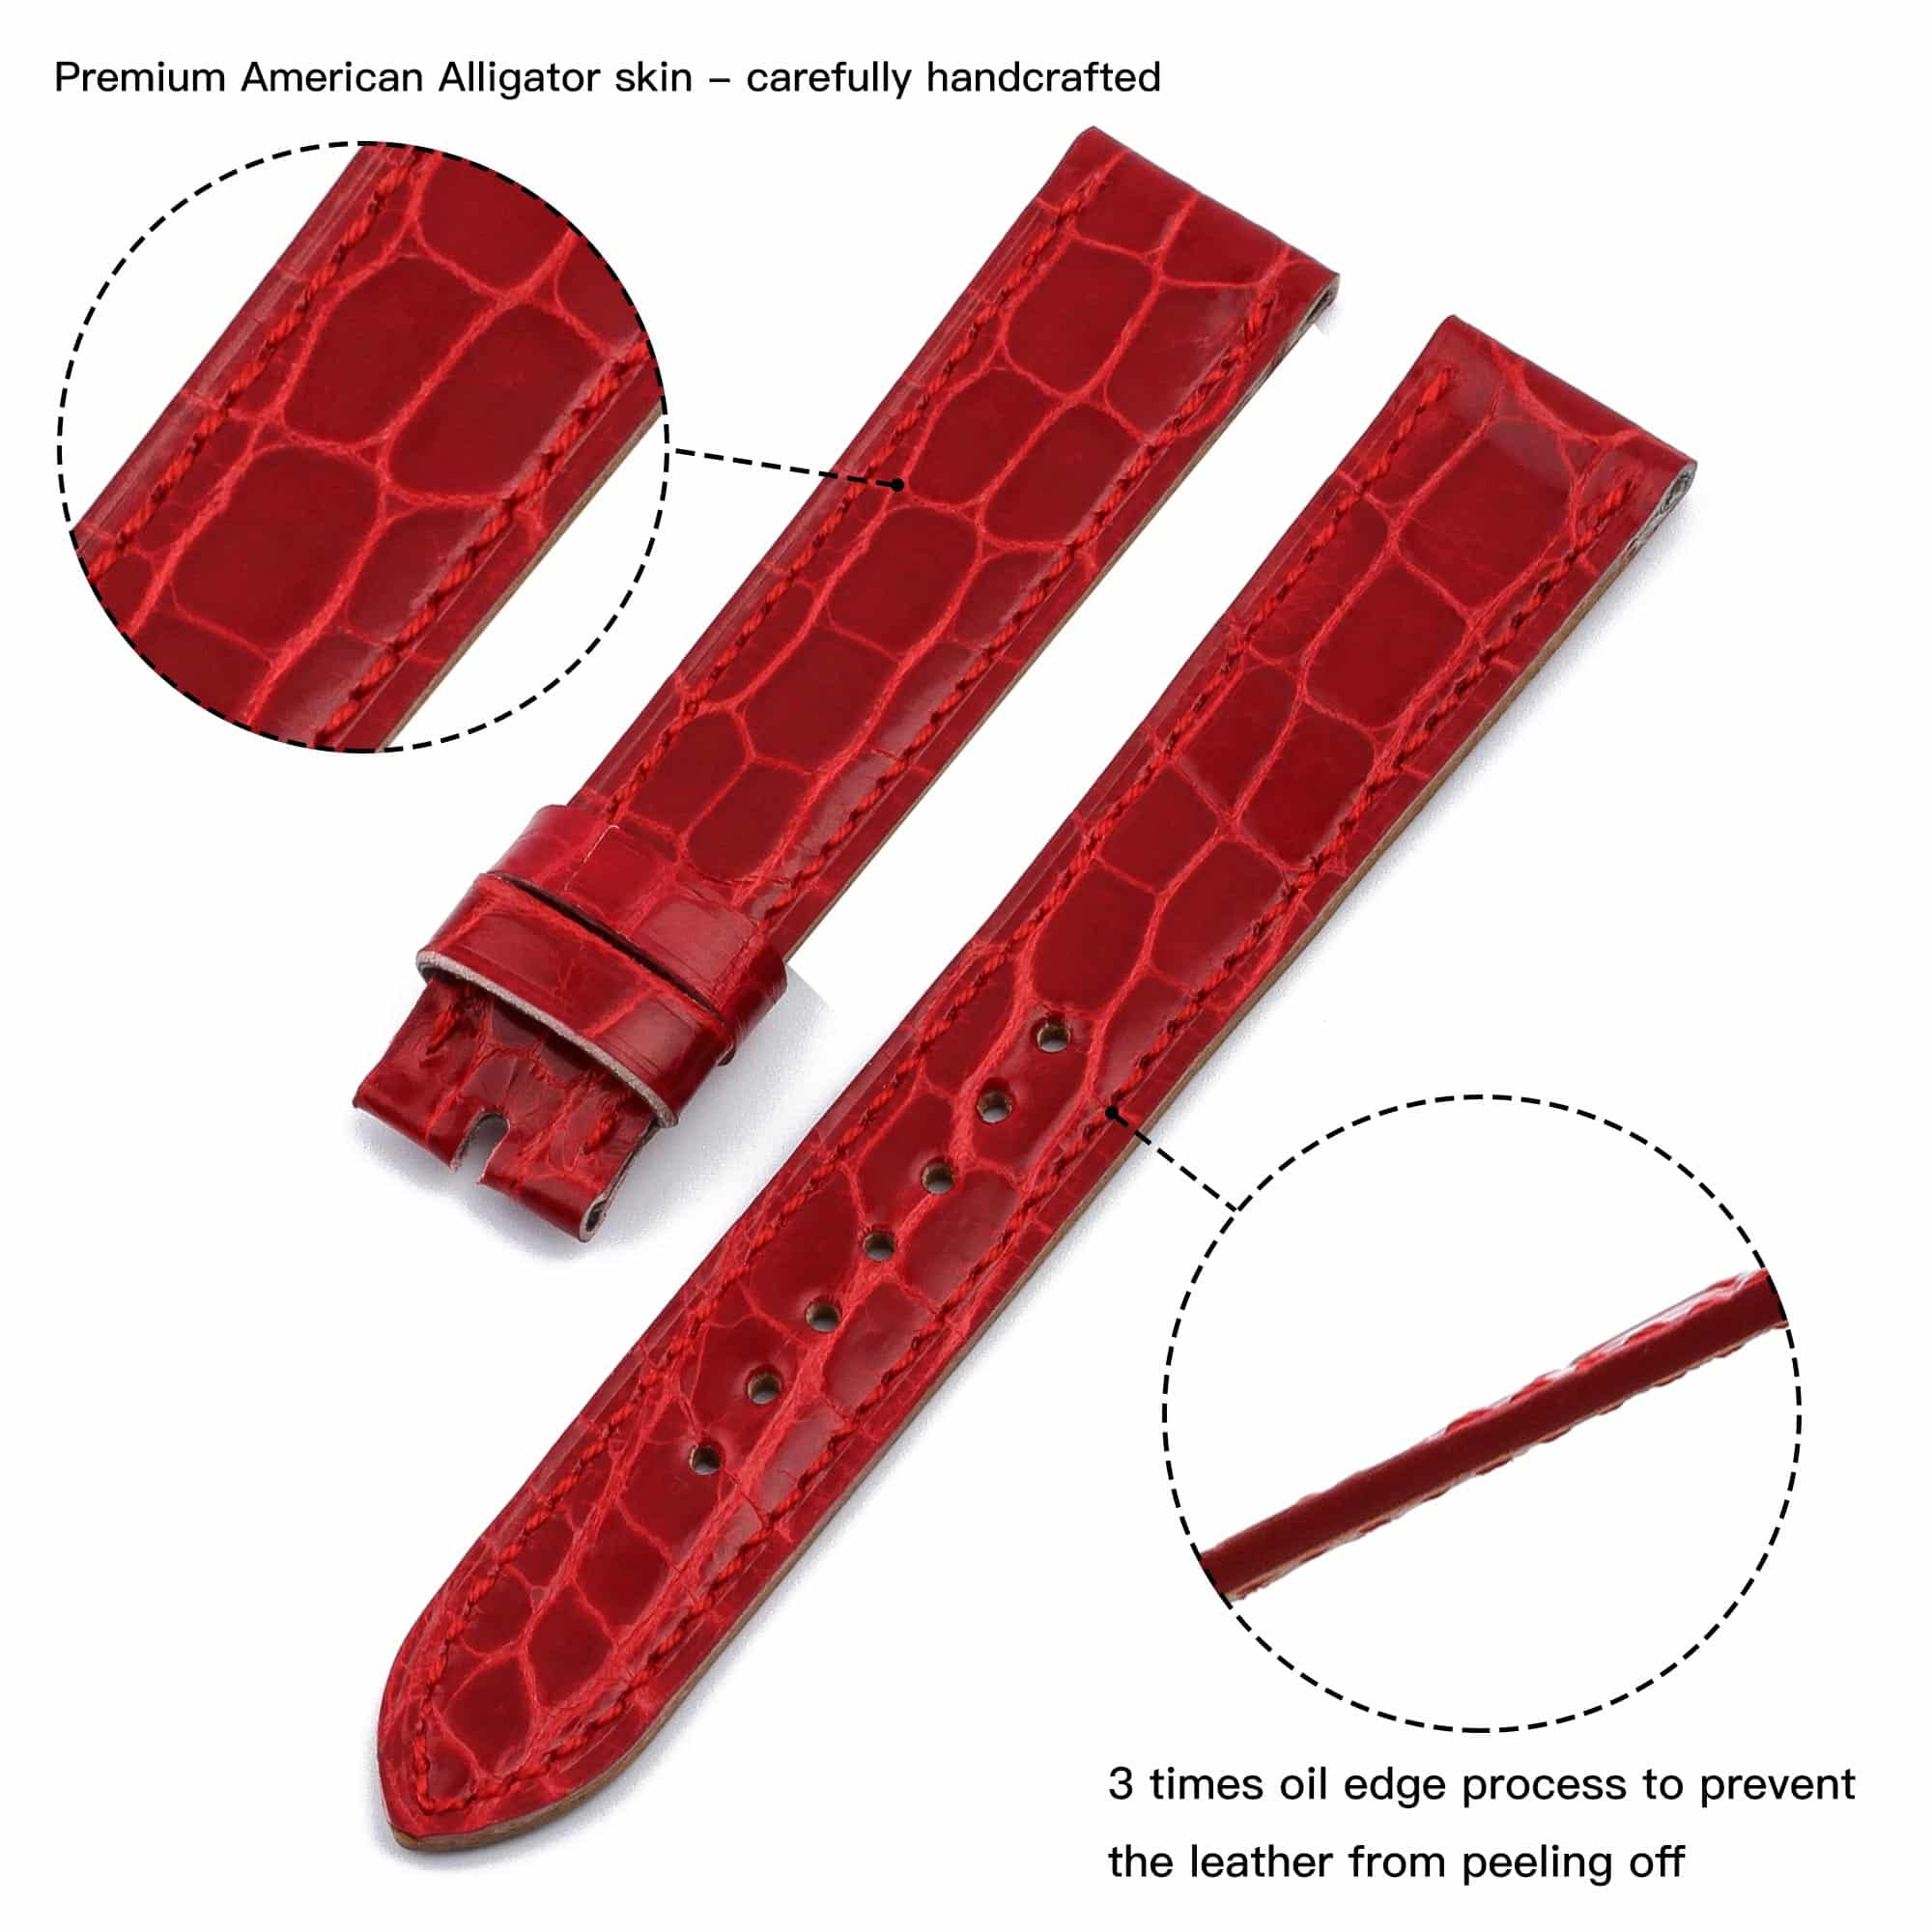 Custom alligator Hermes watch band replacement single tour leather strap compatible for Hermes Heure H and Hermes Cape Cod Arceau luxury watches red watch bands online at a discount price